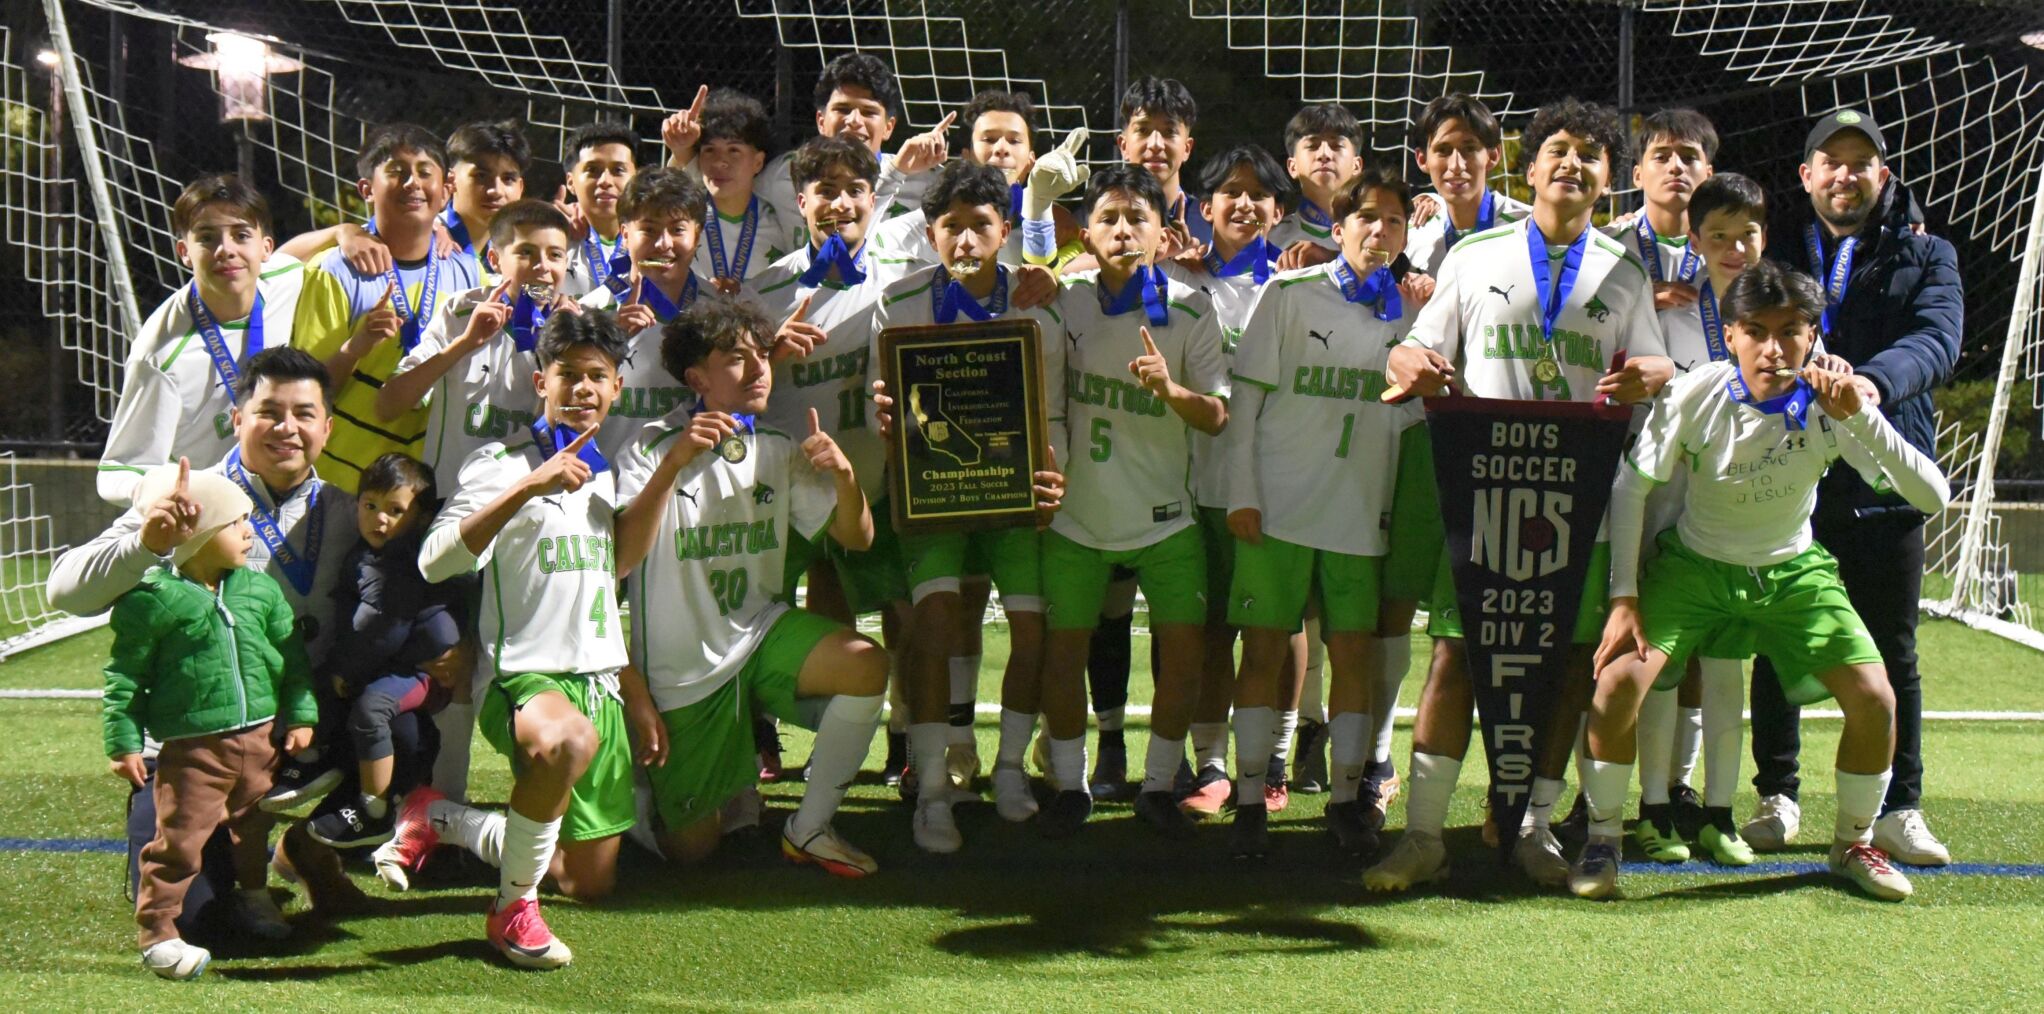 St. Helena High’s Softball Team Wins First-Ever Section Crown, Calistoga High Boys Soccer Team Makes History, and more!